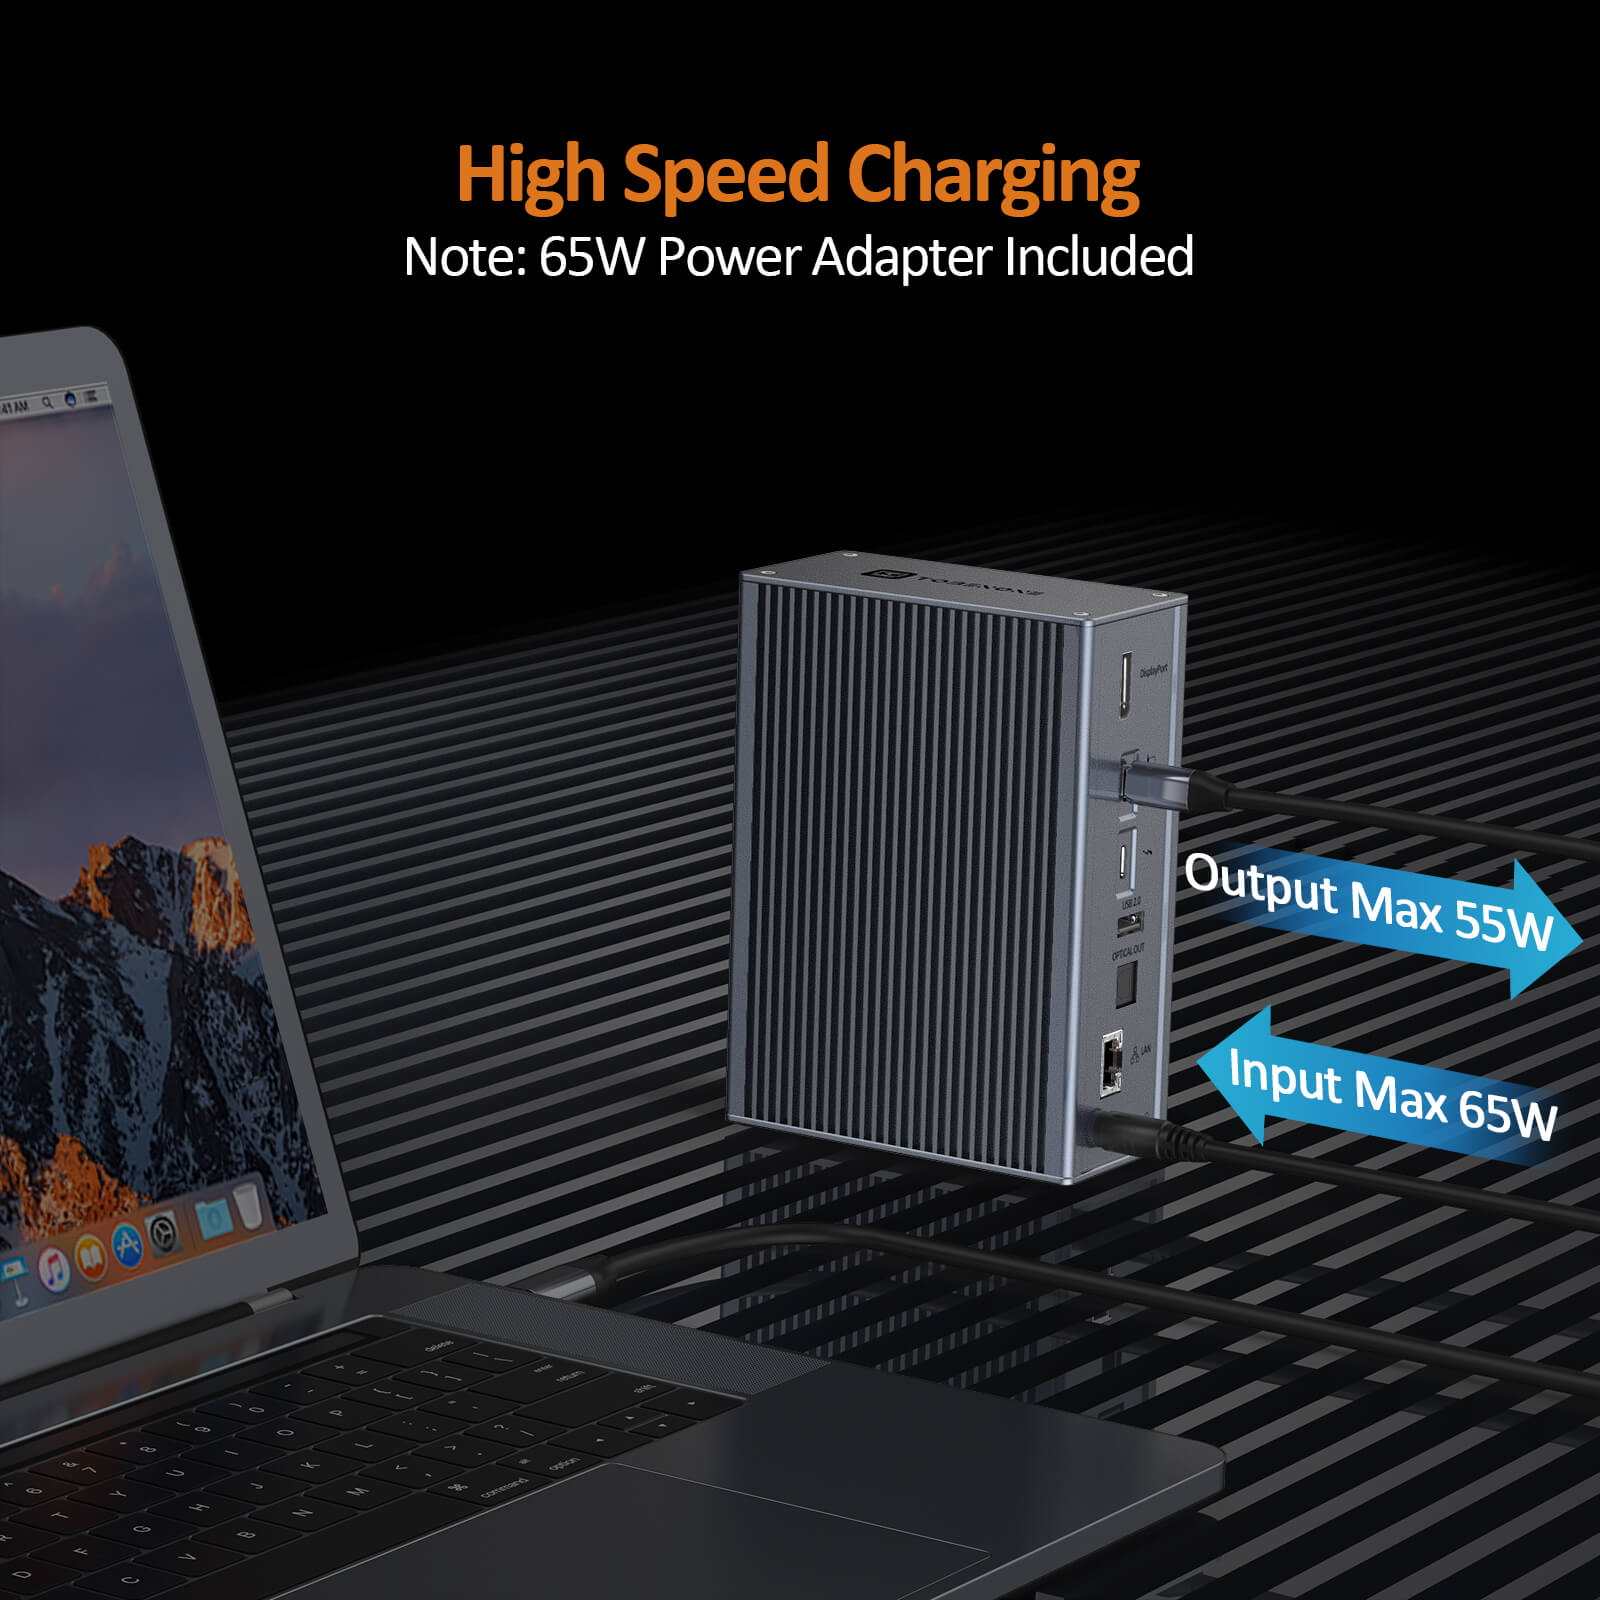 Thunderbolt Dock High Speed Charging Included 65W Power Adapter